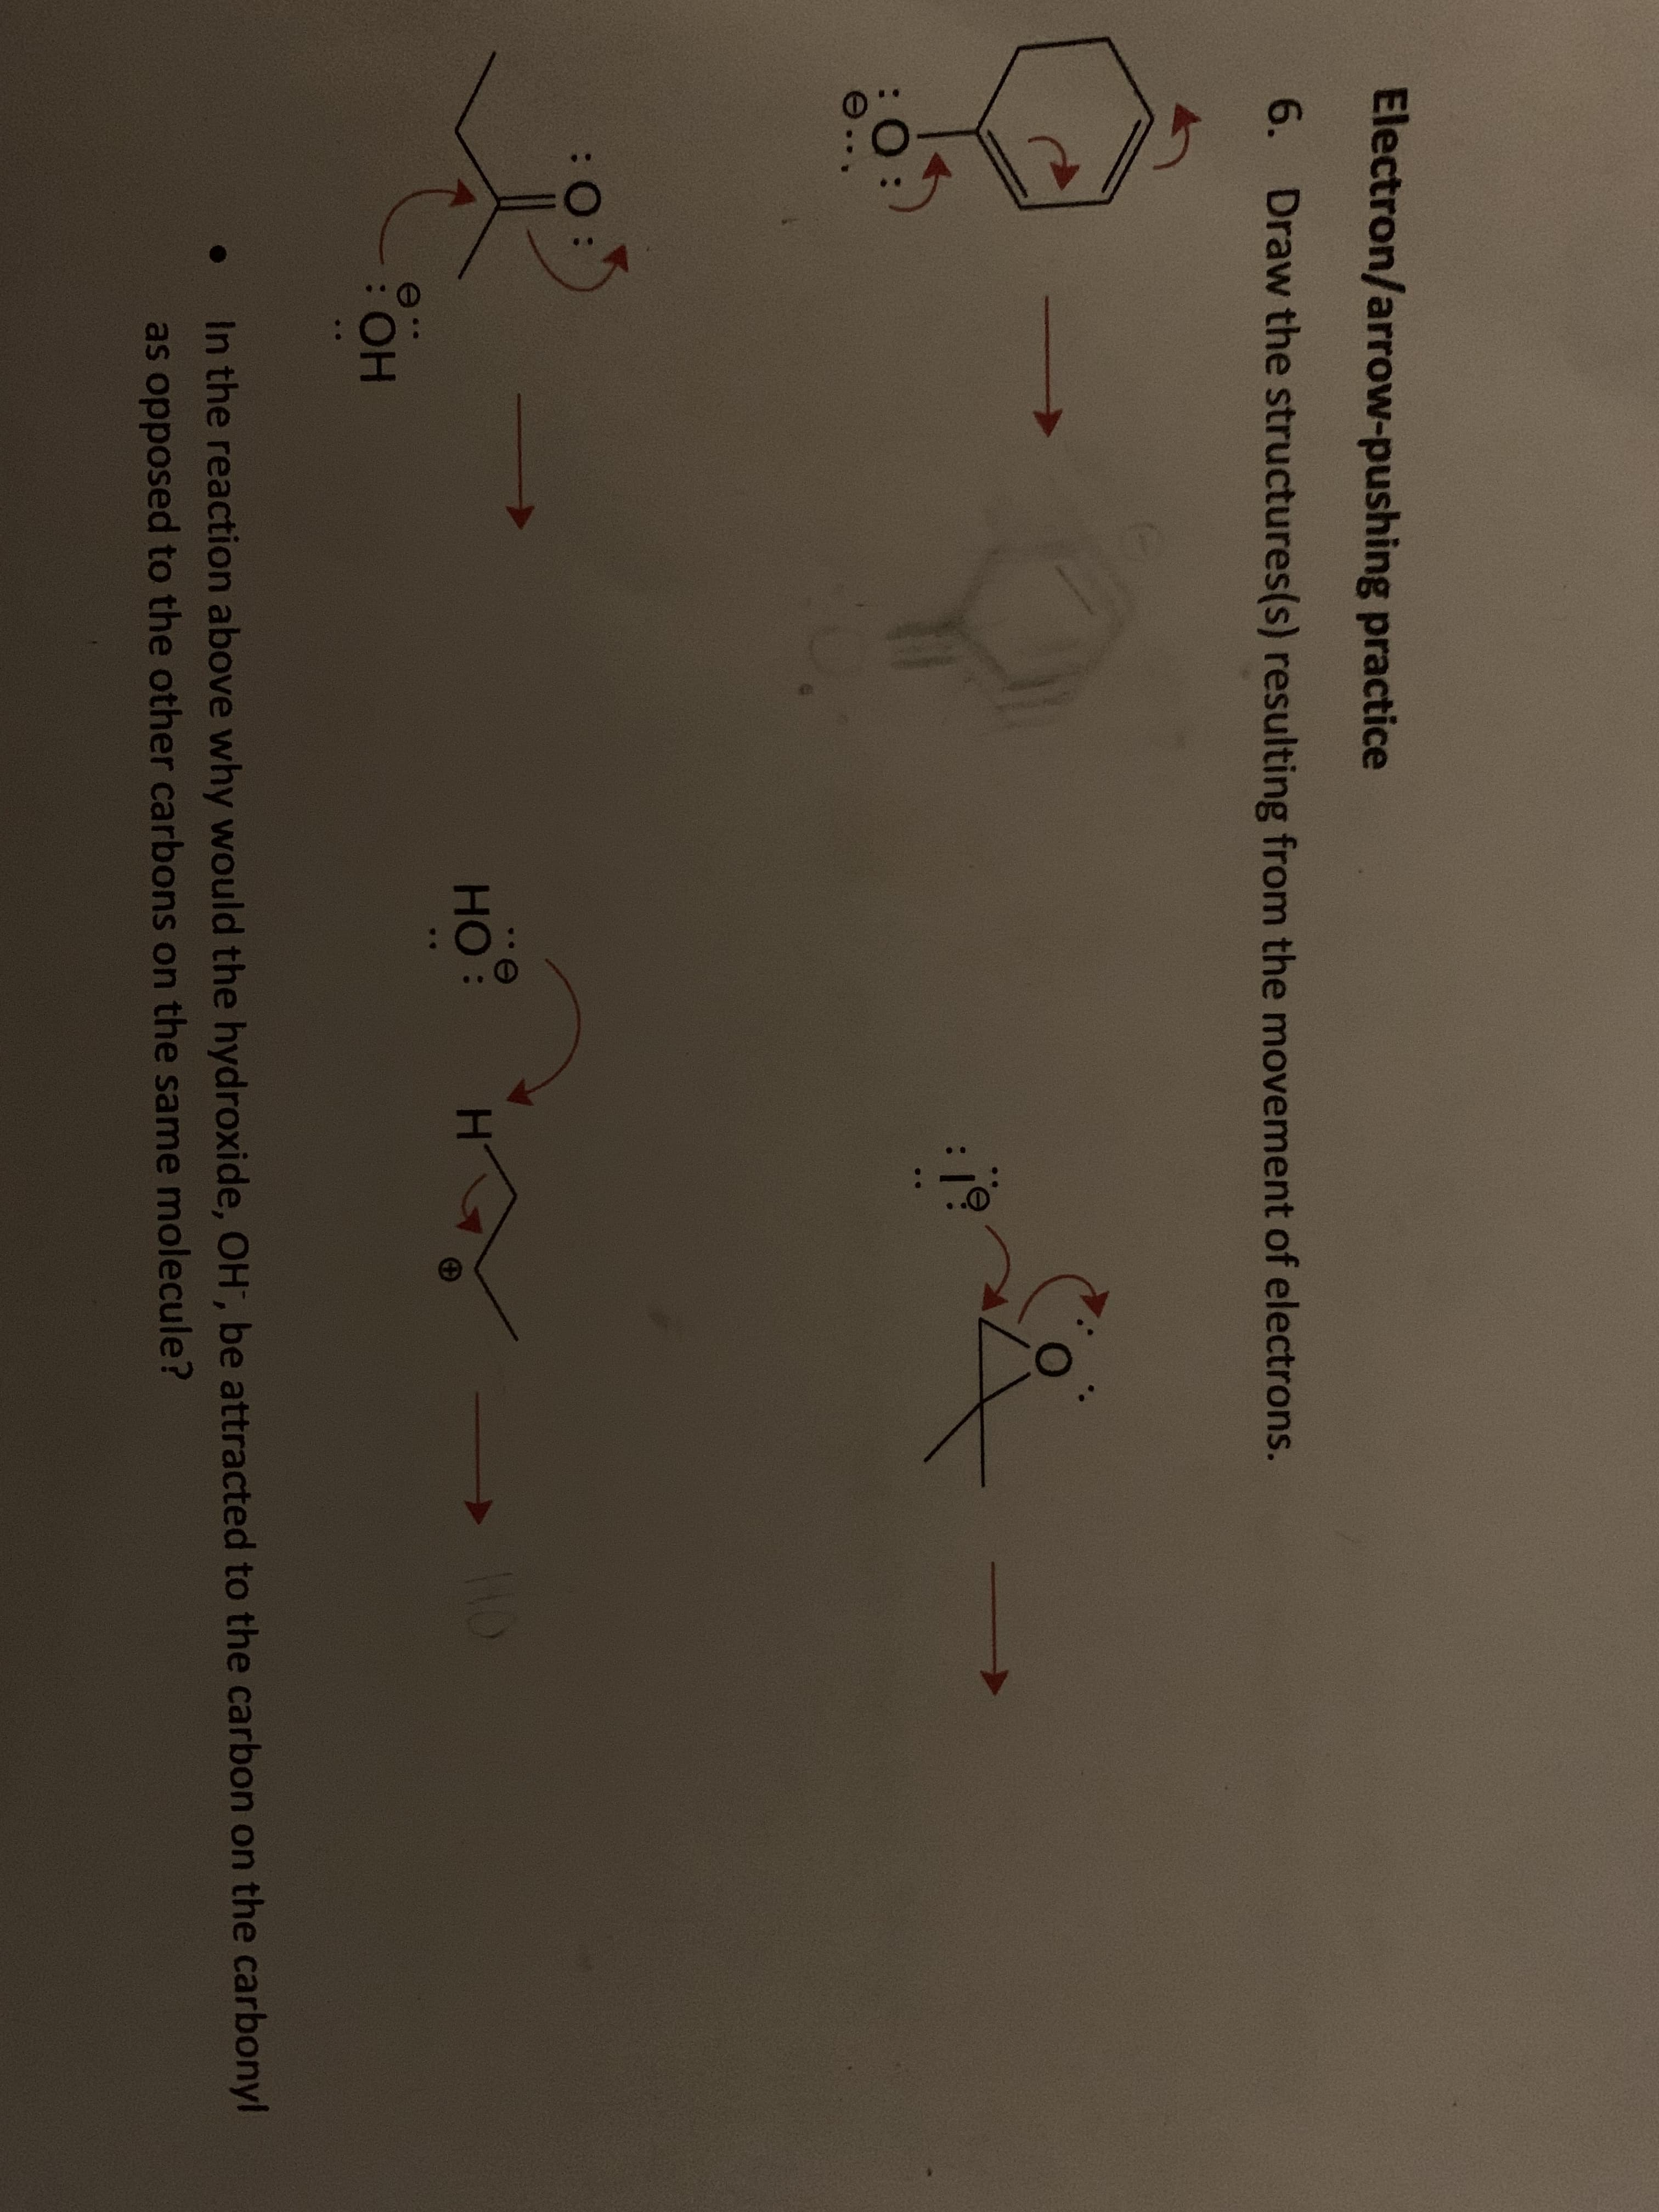 Electron/arrow-pushing practice
6. Draw the structures(s) resulting from the movement of electrons.
e.
но:
HO
e
:HO:
In the reaction above why would the hydroxide, OH, be attracted to the carbon on the carbonyl
as opposed to the other carbons on the same molecule?
